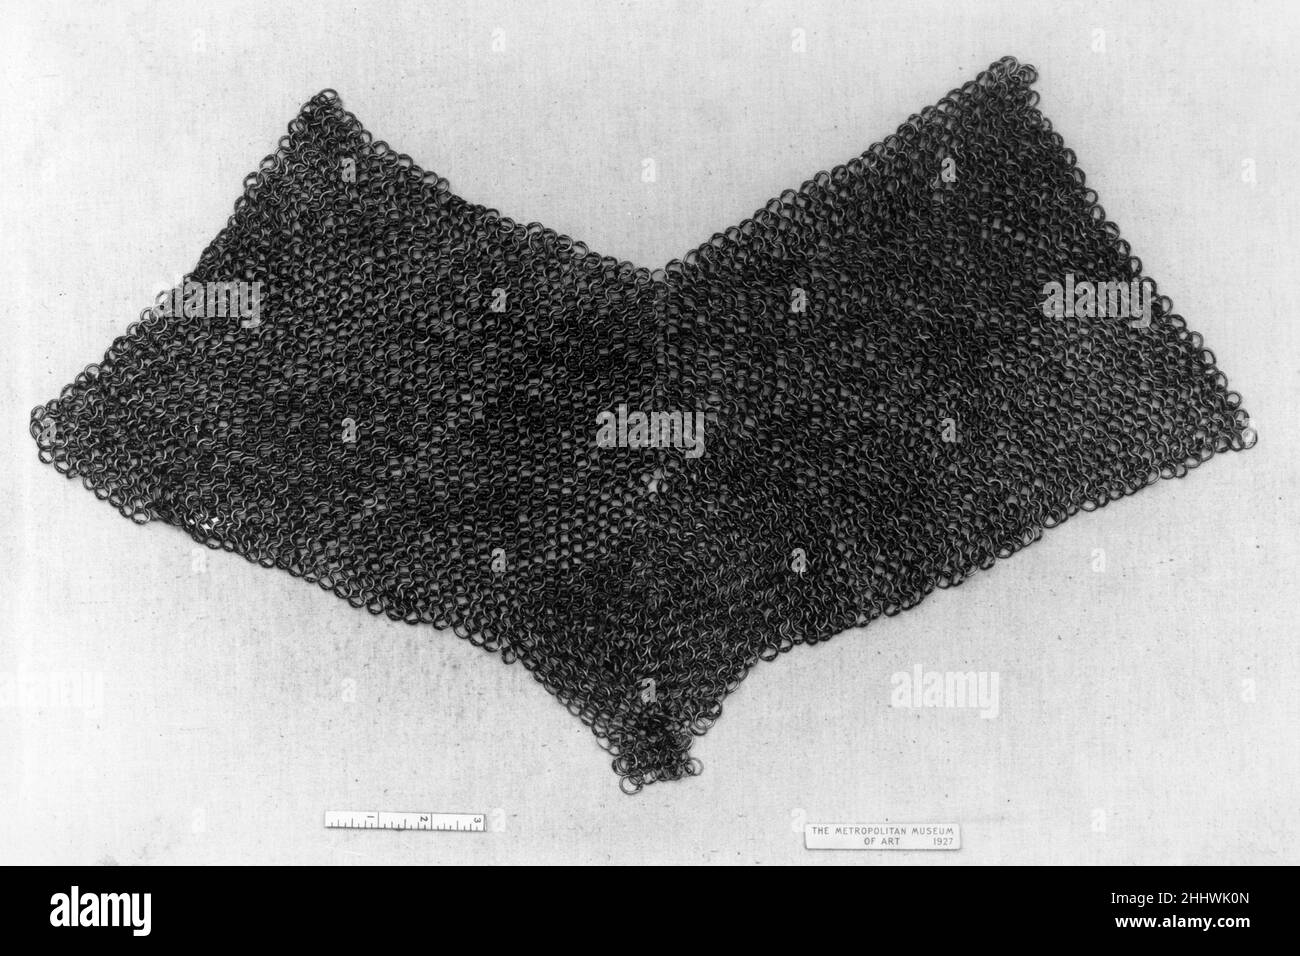 Brayette 16th century German From about the third century B.C. through the early fourteenth century A.D., mail, also called chain mail, was the predominant and most effective type of body armor known in Europe. From about the mid-fifteenth century onward, mail was used in conjunction with full plate armor to fill the gaps between plates. Separate mail sleeves were made to be worn with a cuirass (breastplate and backplate); shaped panels of mail called gussets, covered the armpits or the crooks of the elbows and were attached to arming jackets, garments specially tailored to be worn under armor Stock Photo